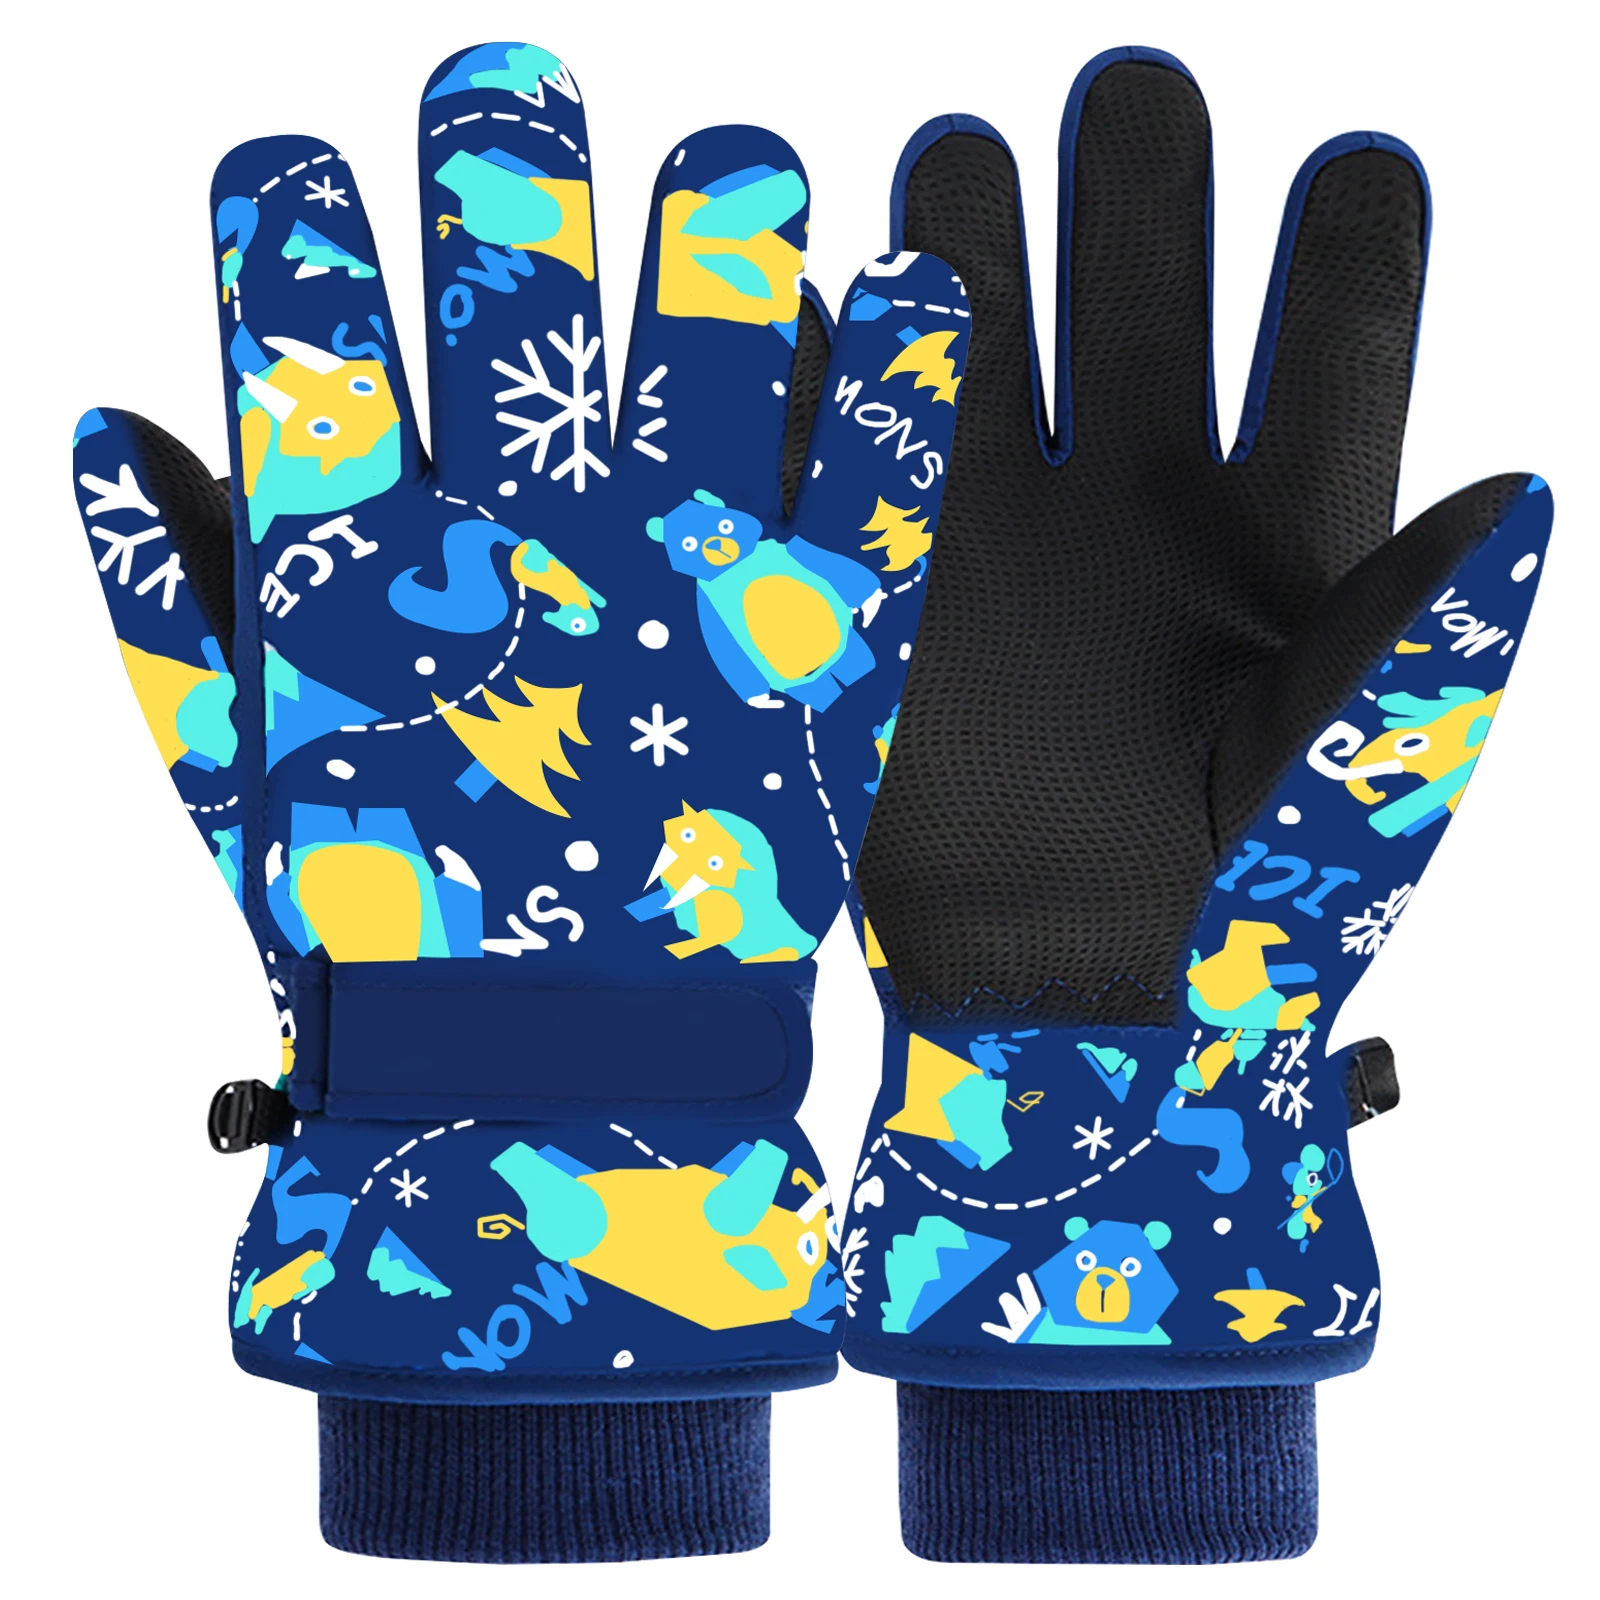 Kids Winter Snow Ski Gloves Cold Weather Windproof Warm Skiing Snowboard Sport Mittens for Boys Girls Drop Shipping